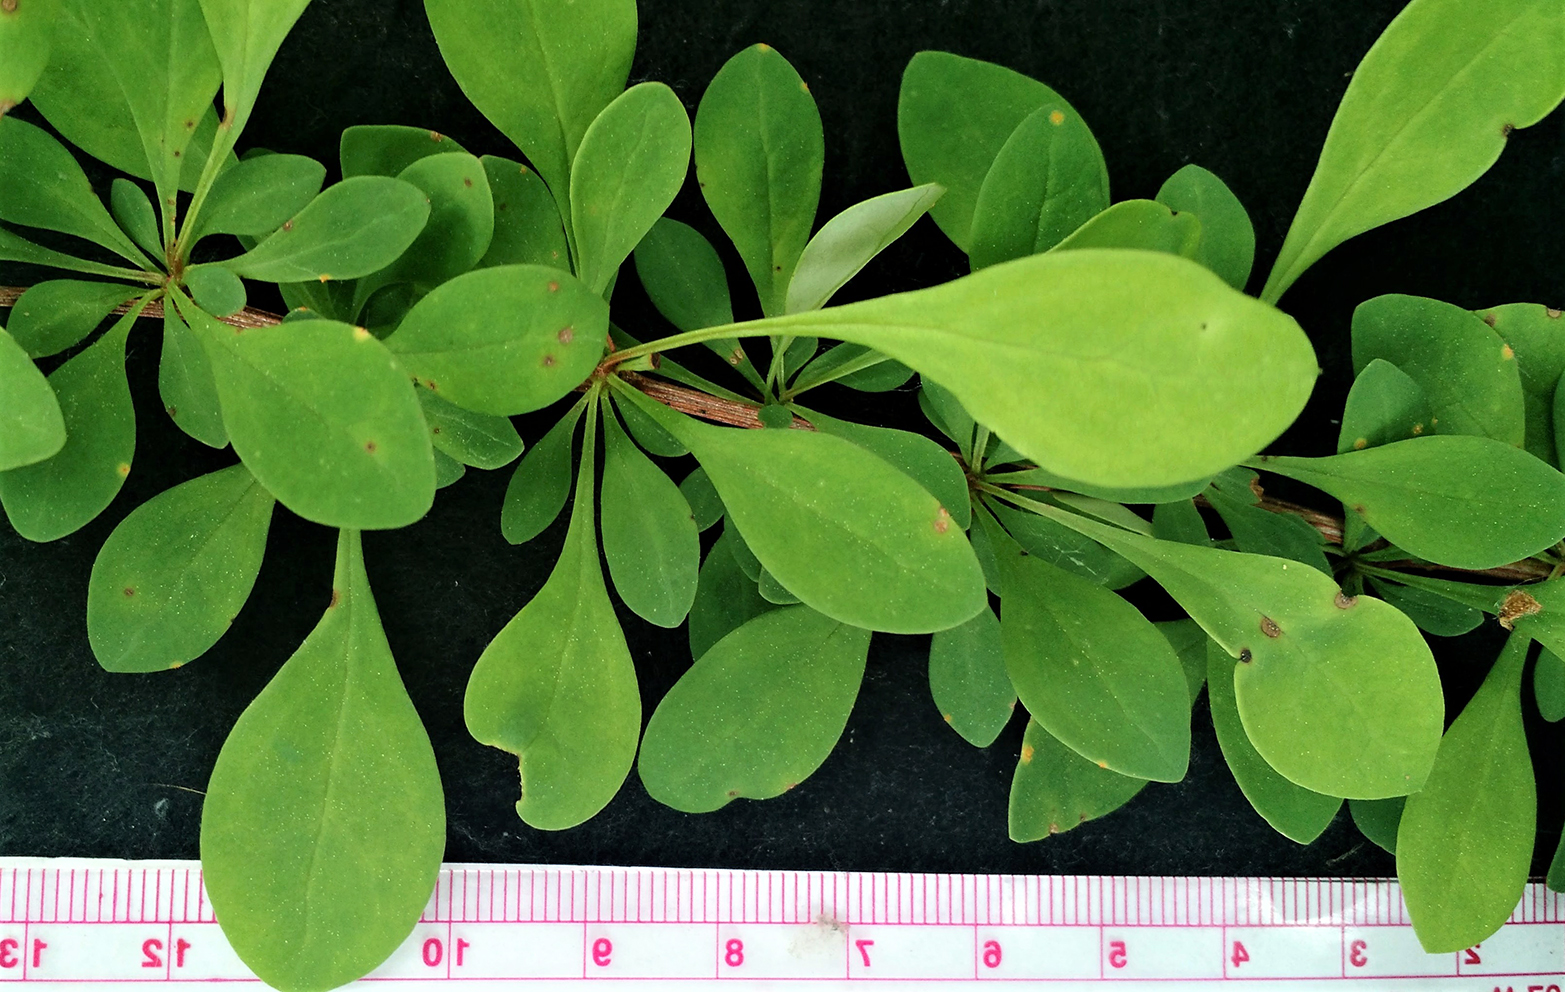 Image of Japanese barberry leaves